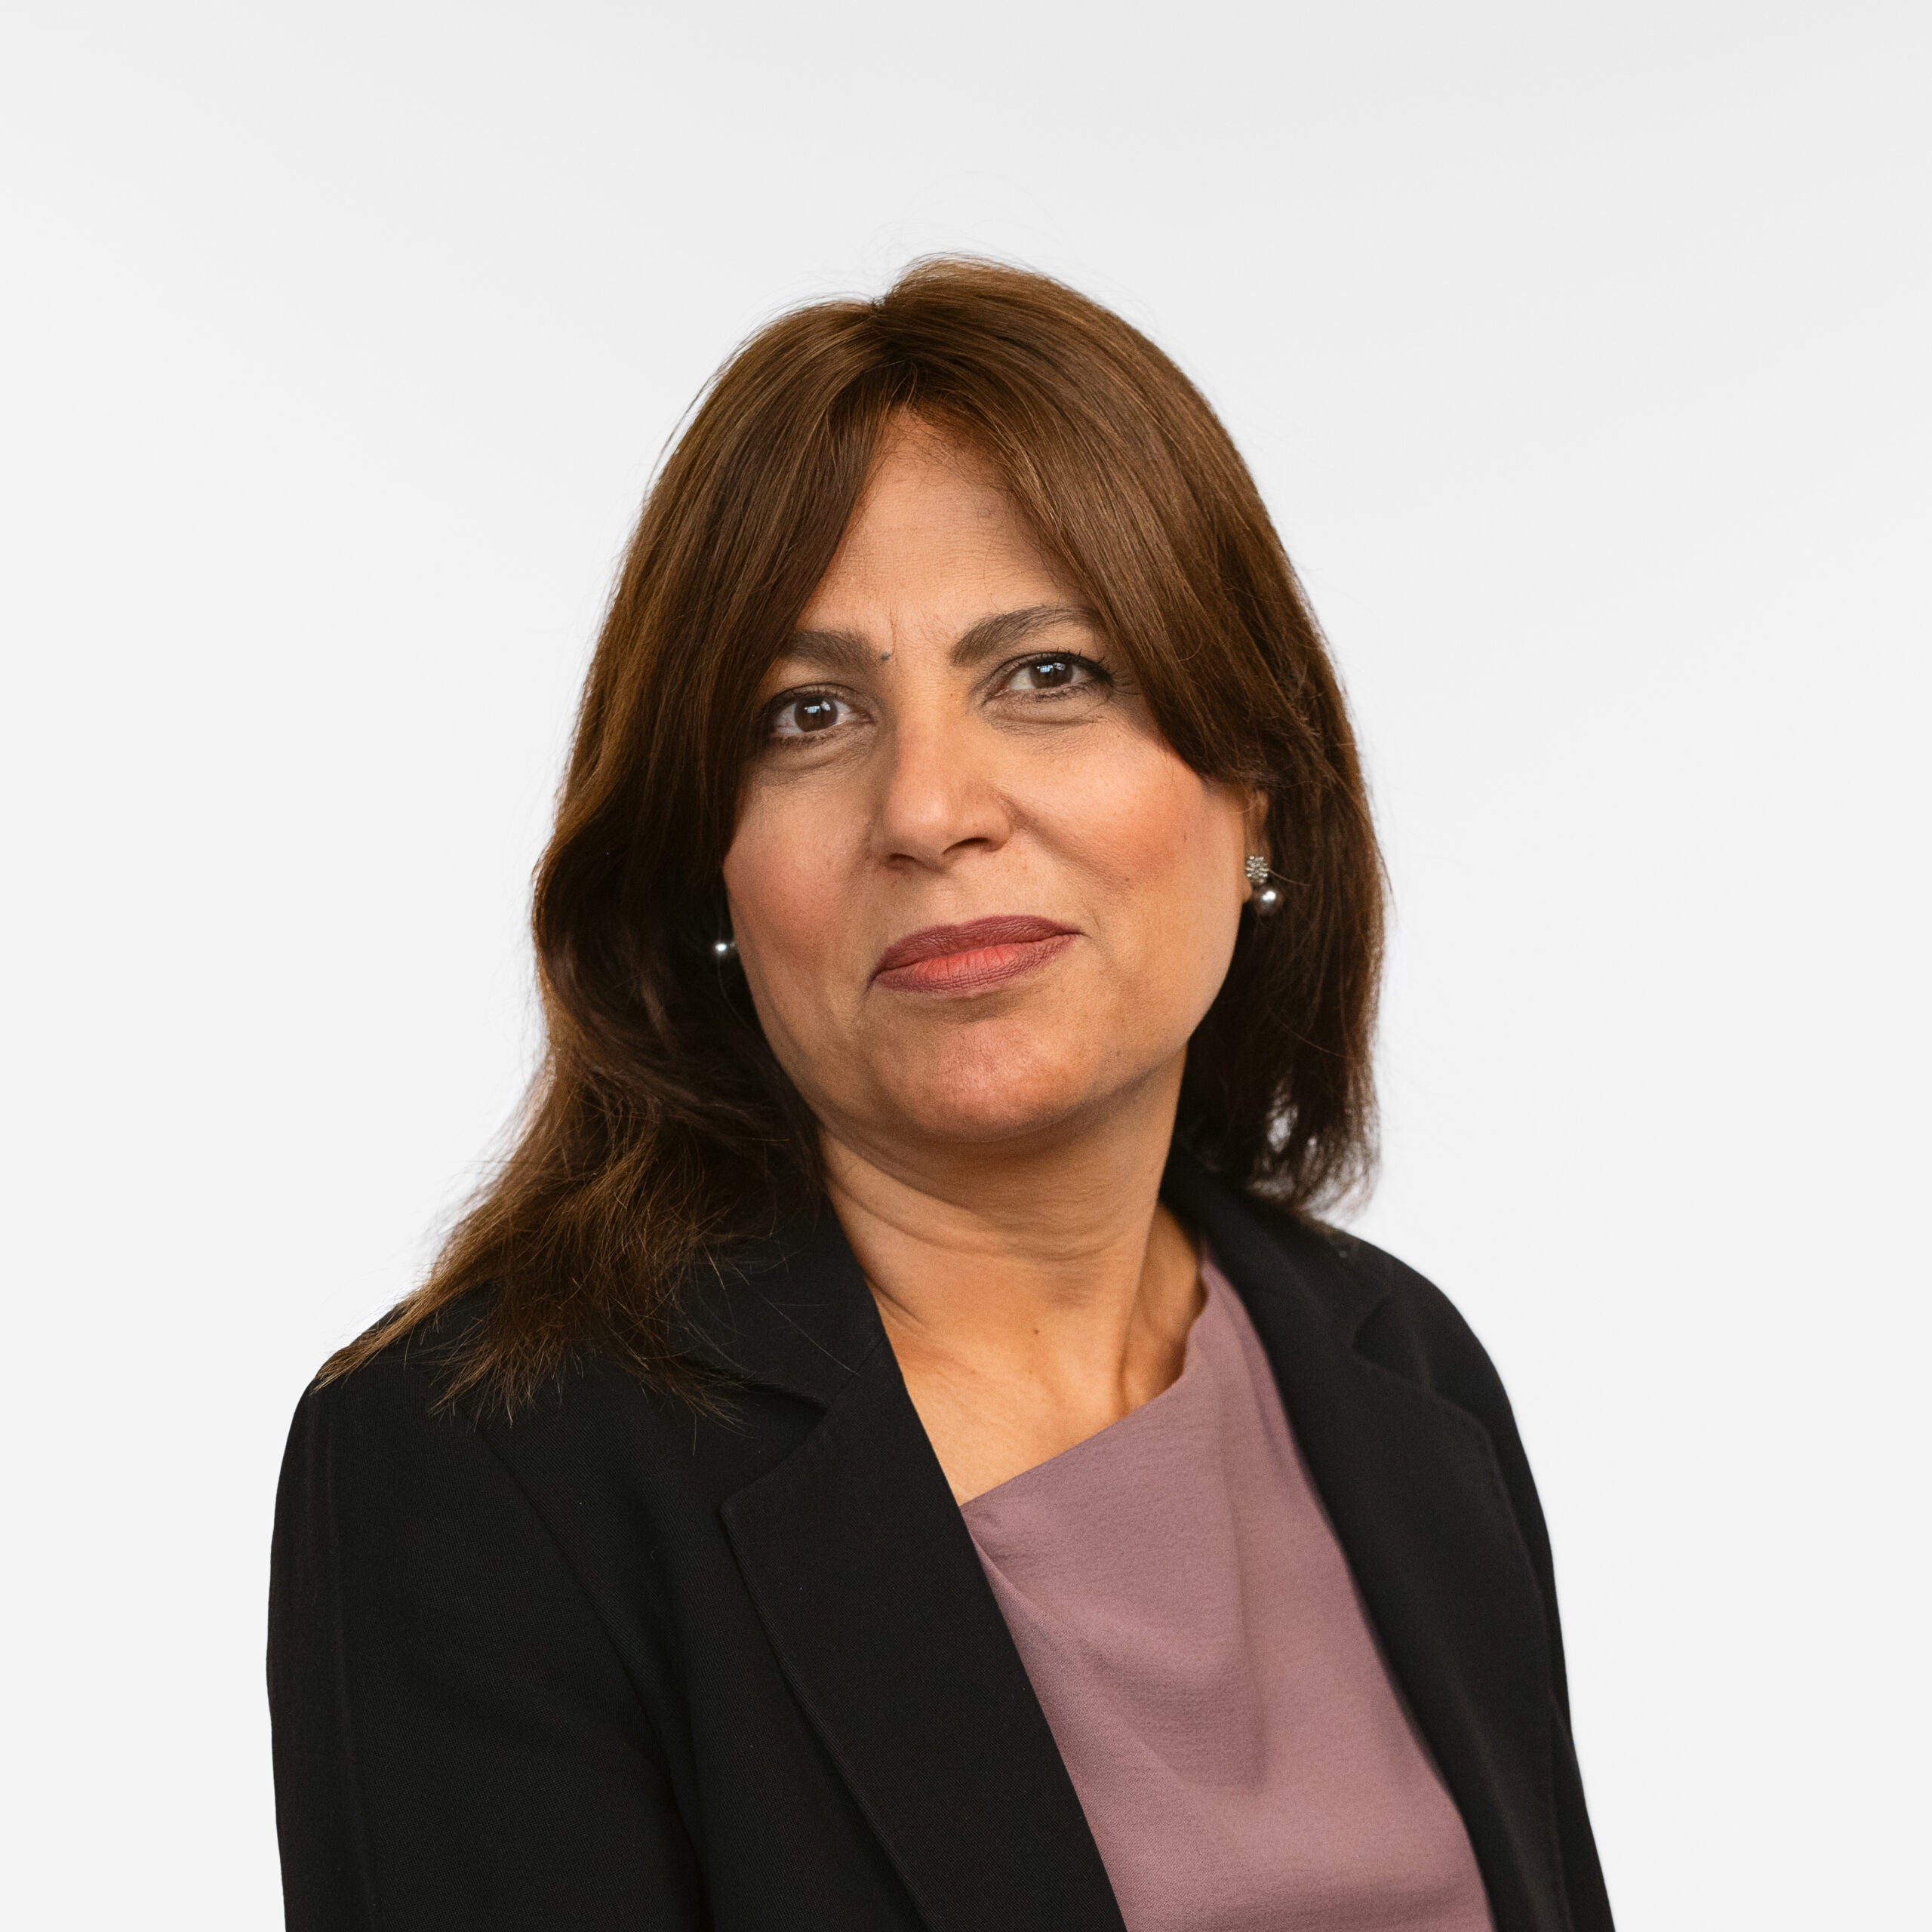 Jas Chahal, Chief Legal Officer and General Counsel